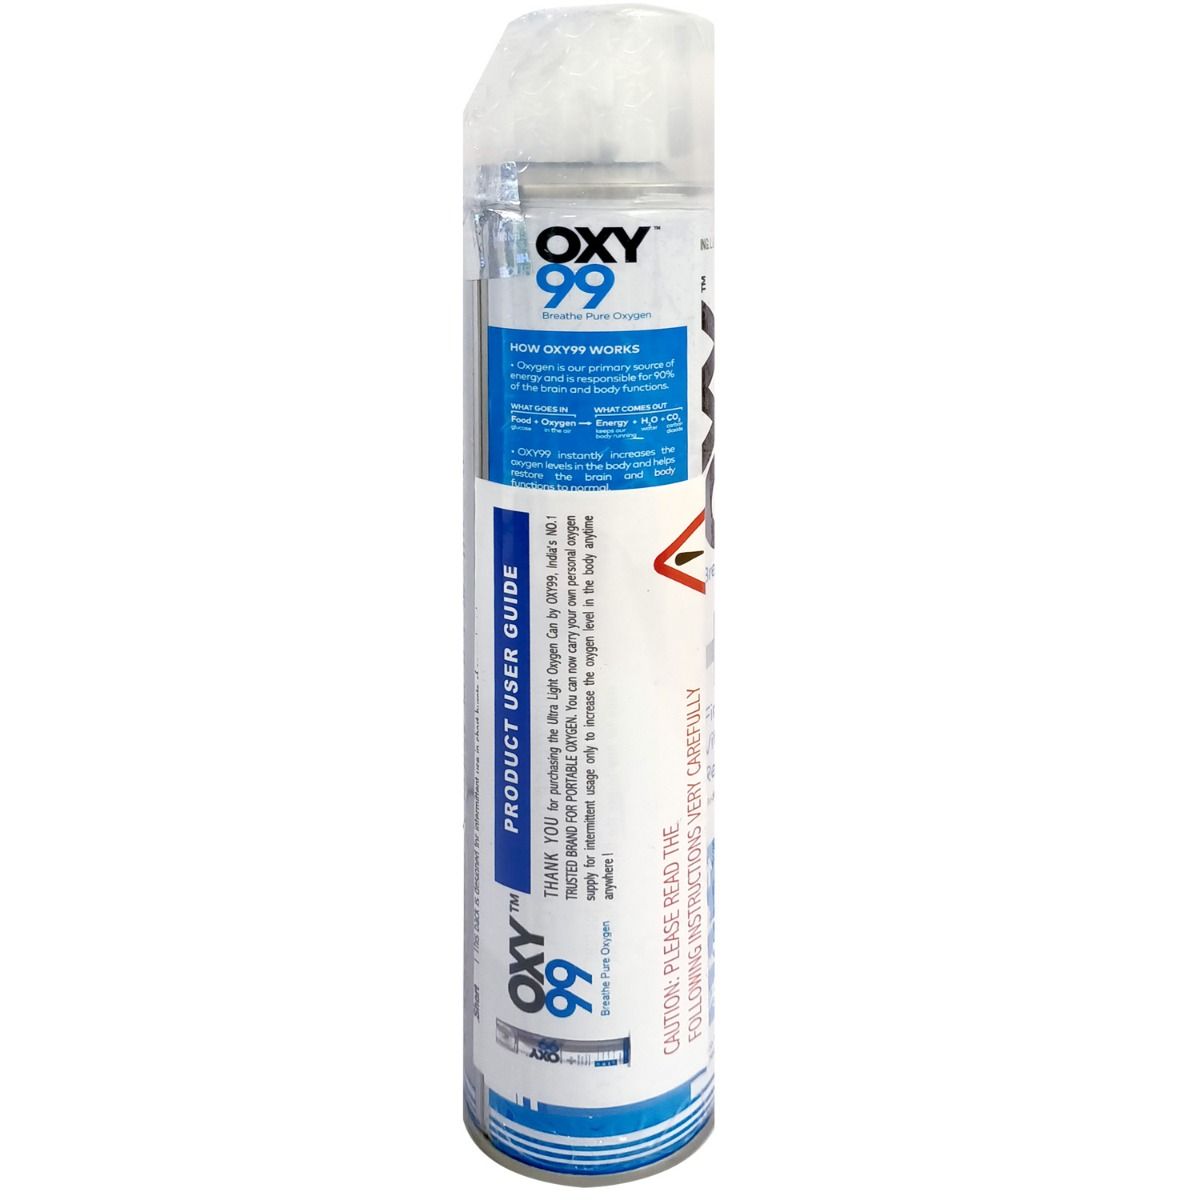 Boschi Italy Oxy99 Portable 500 ml Oxygen Can With One Mask, 1 Kit, Pack of 1 